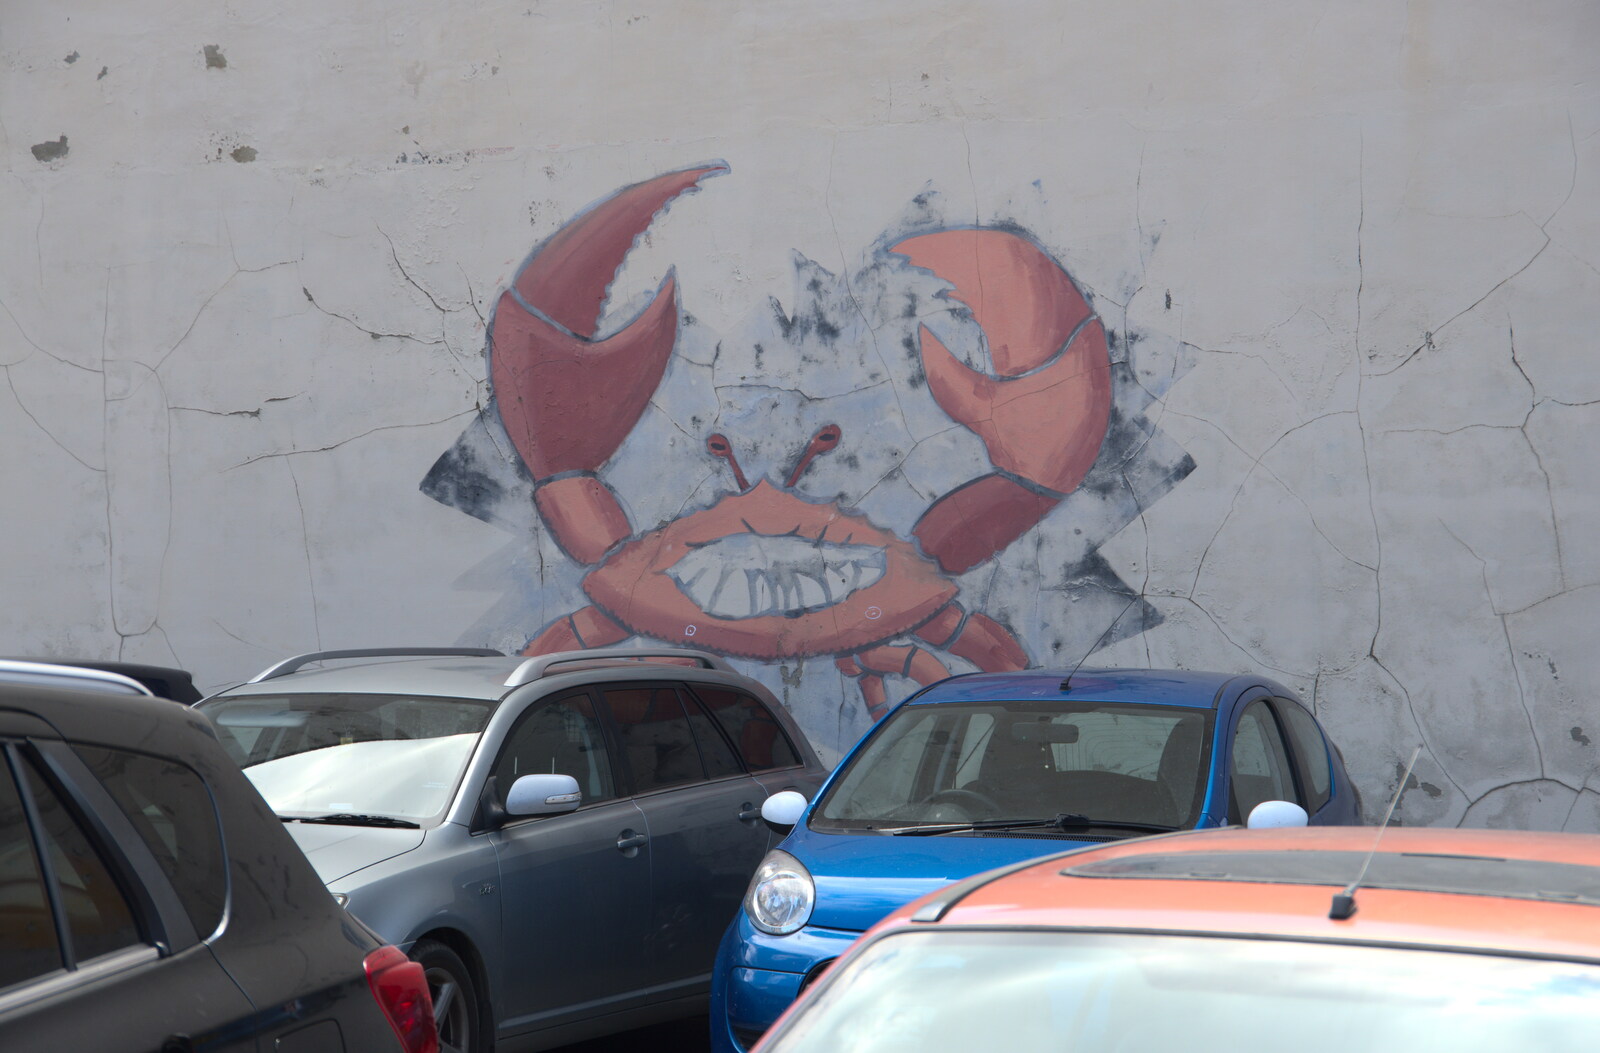 Some cool crab graffiti in a car park from Camping on the Coast, East Runton, North Norfolk - 25th July 2020